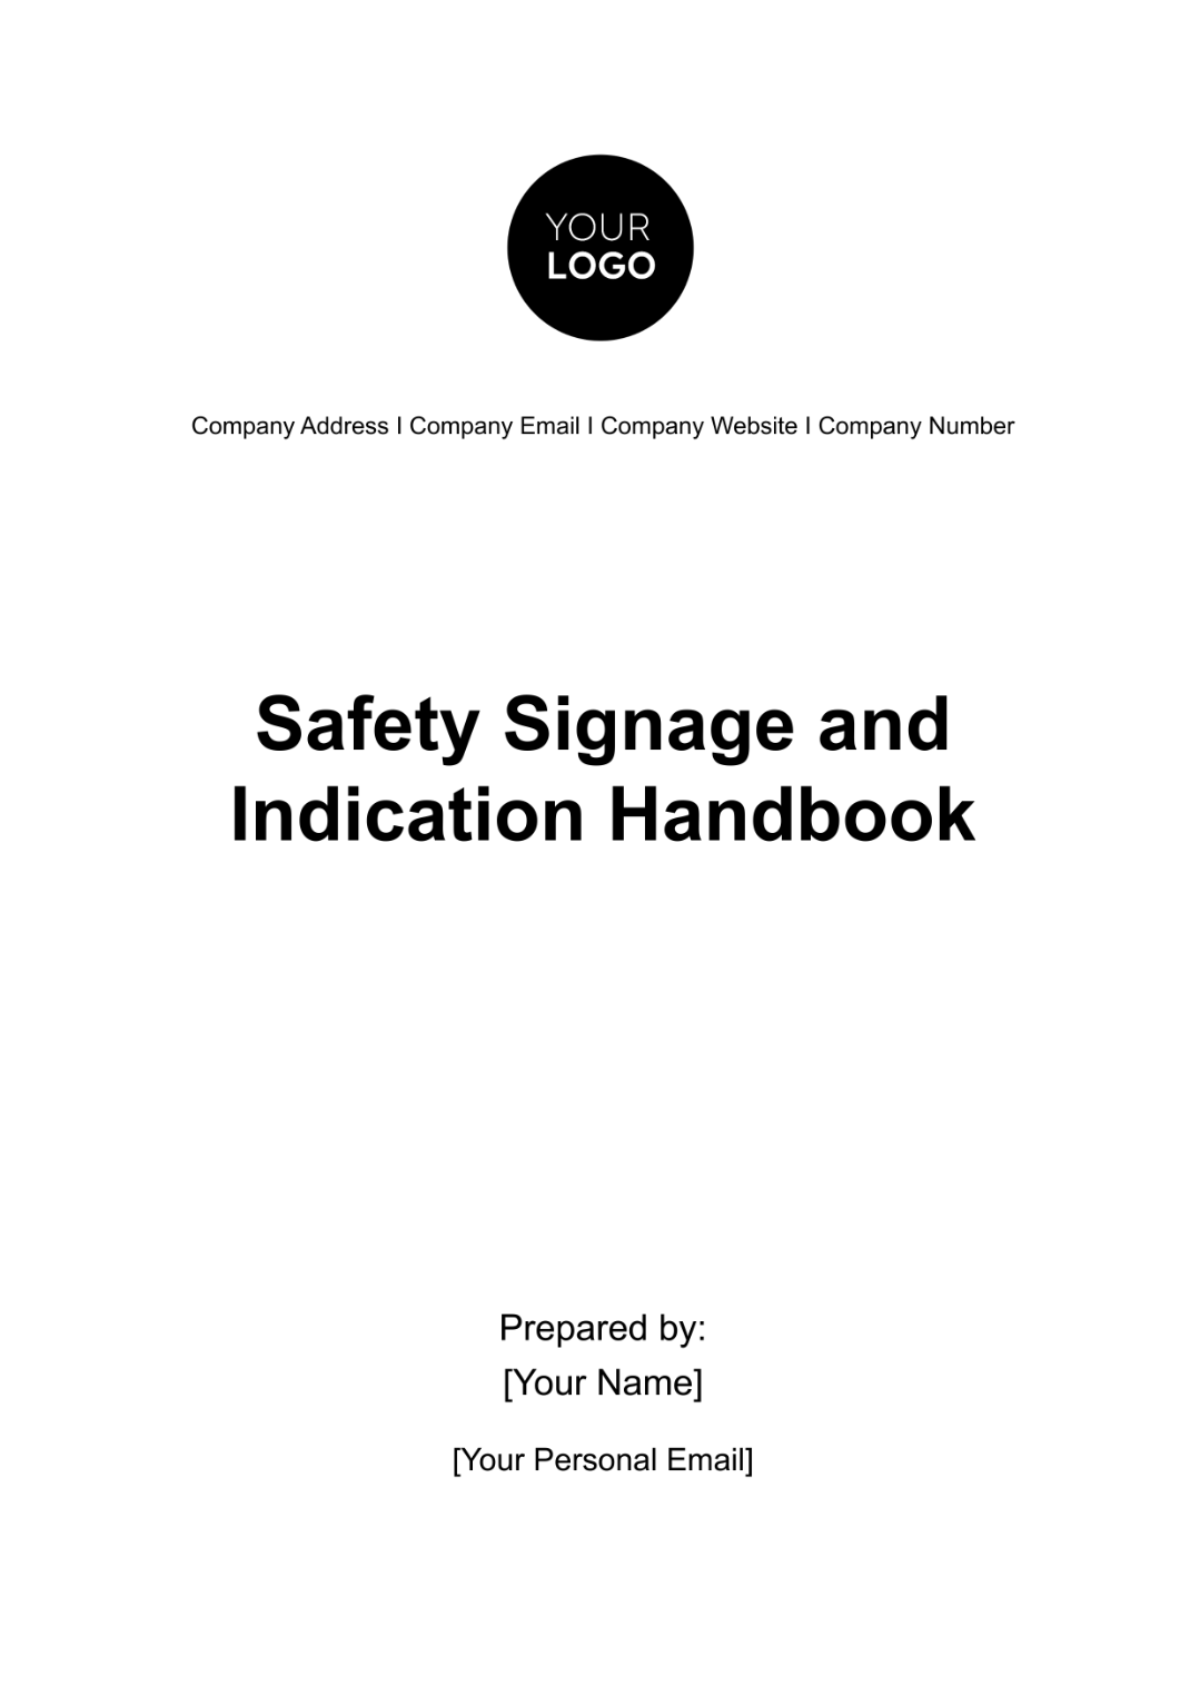 Free Safety Signage and Indication Handbook HR Template